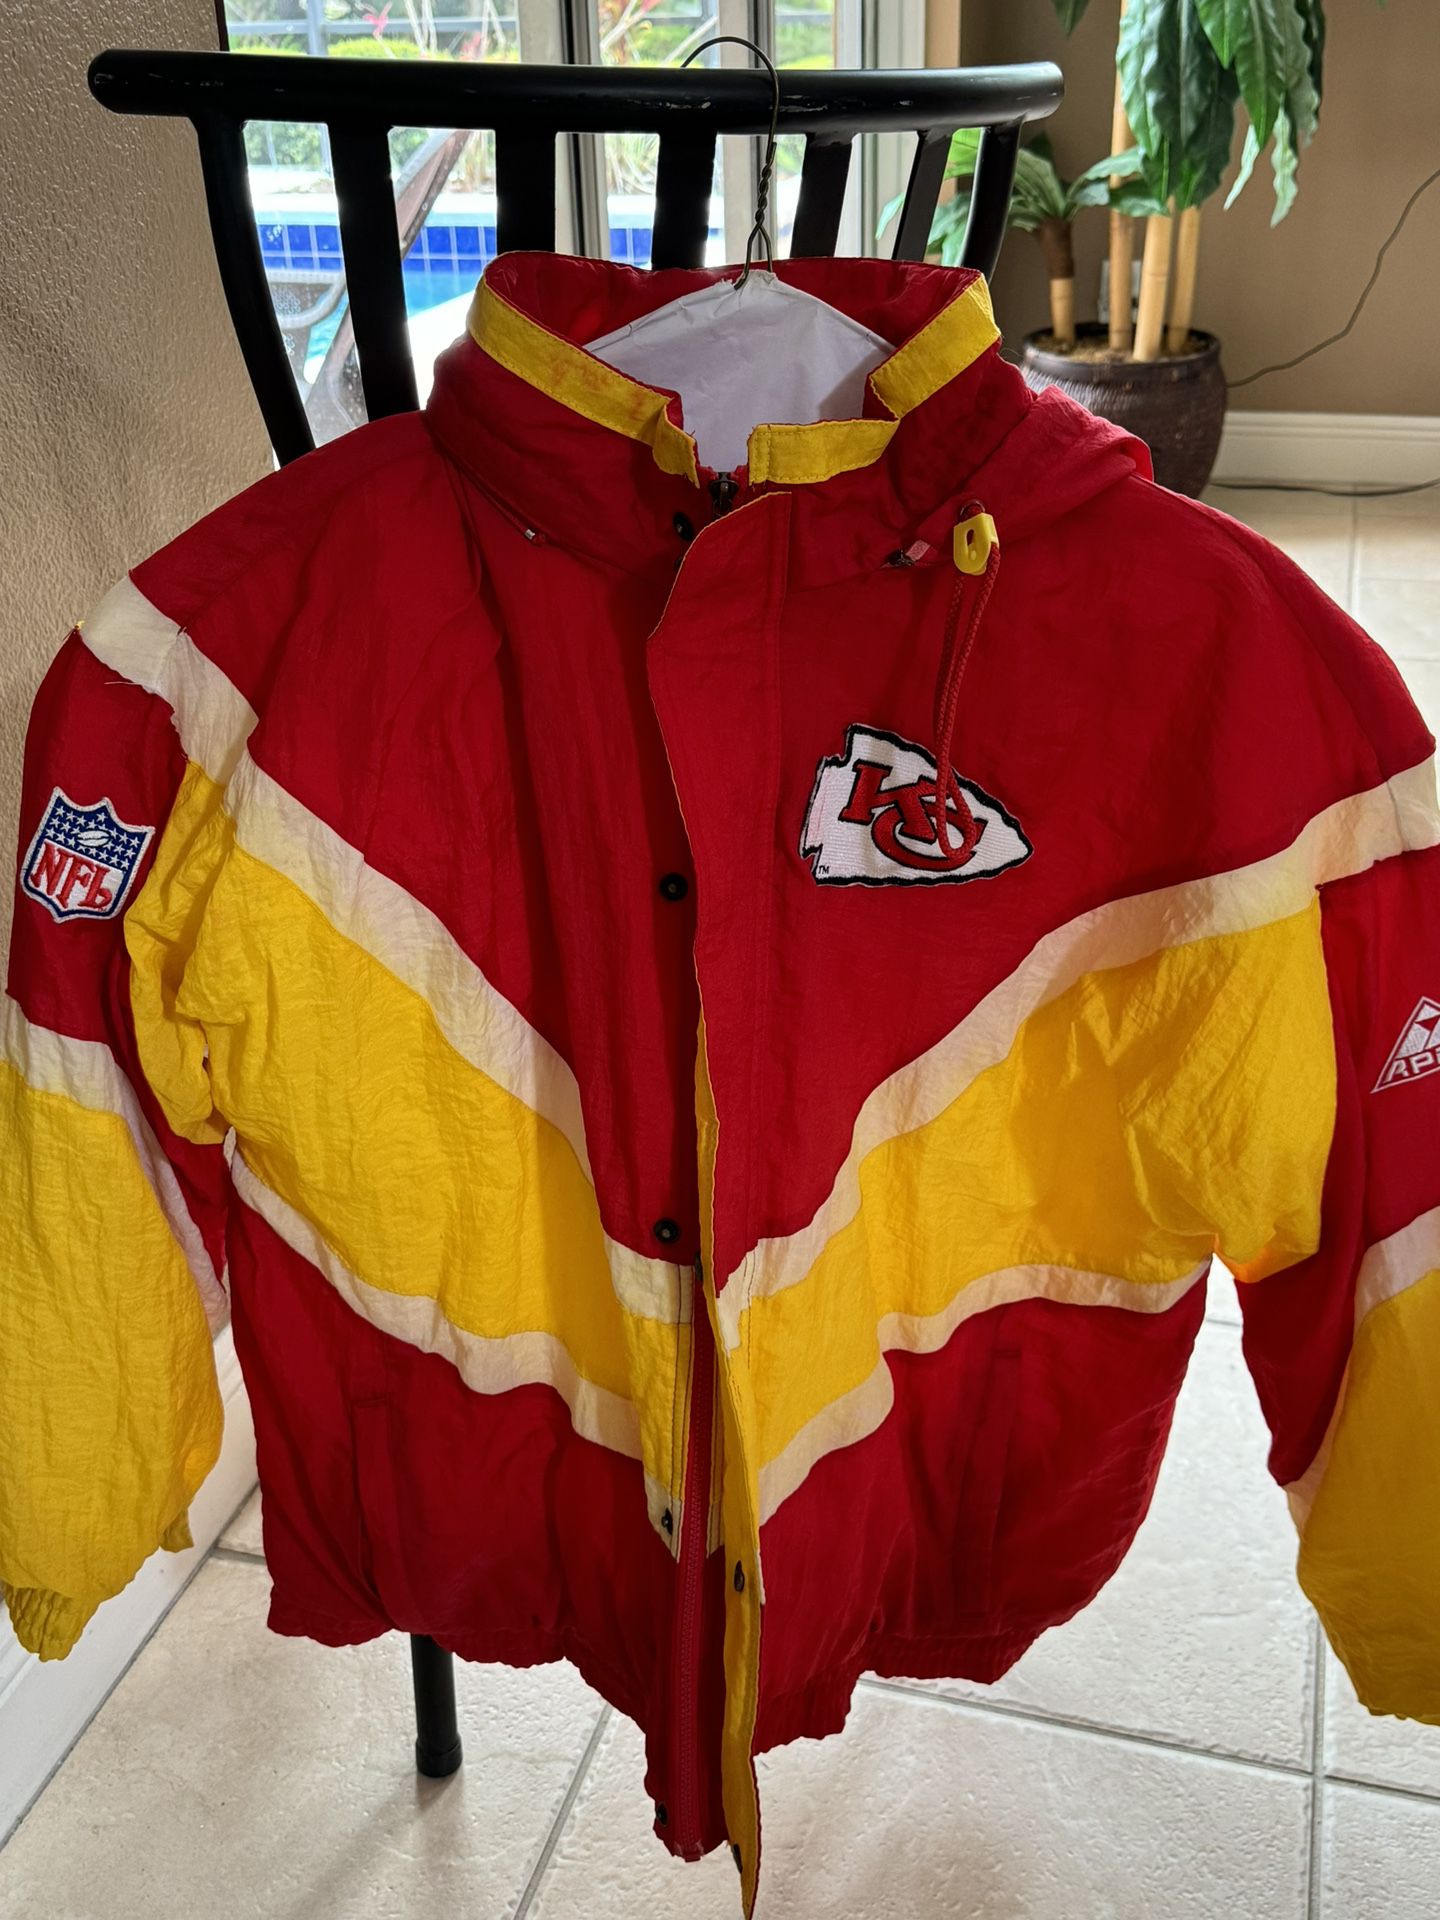 KC CHIEFS Hooded Jacket